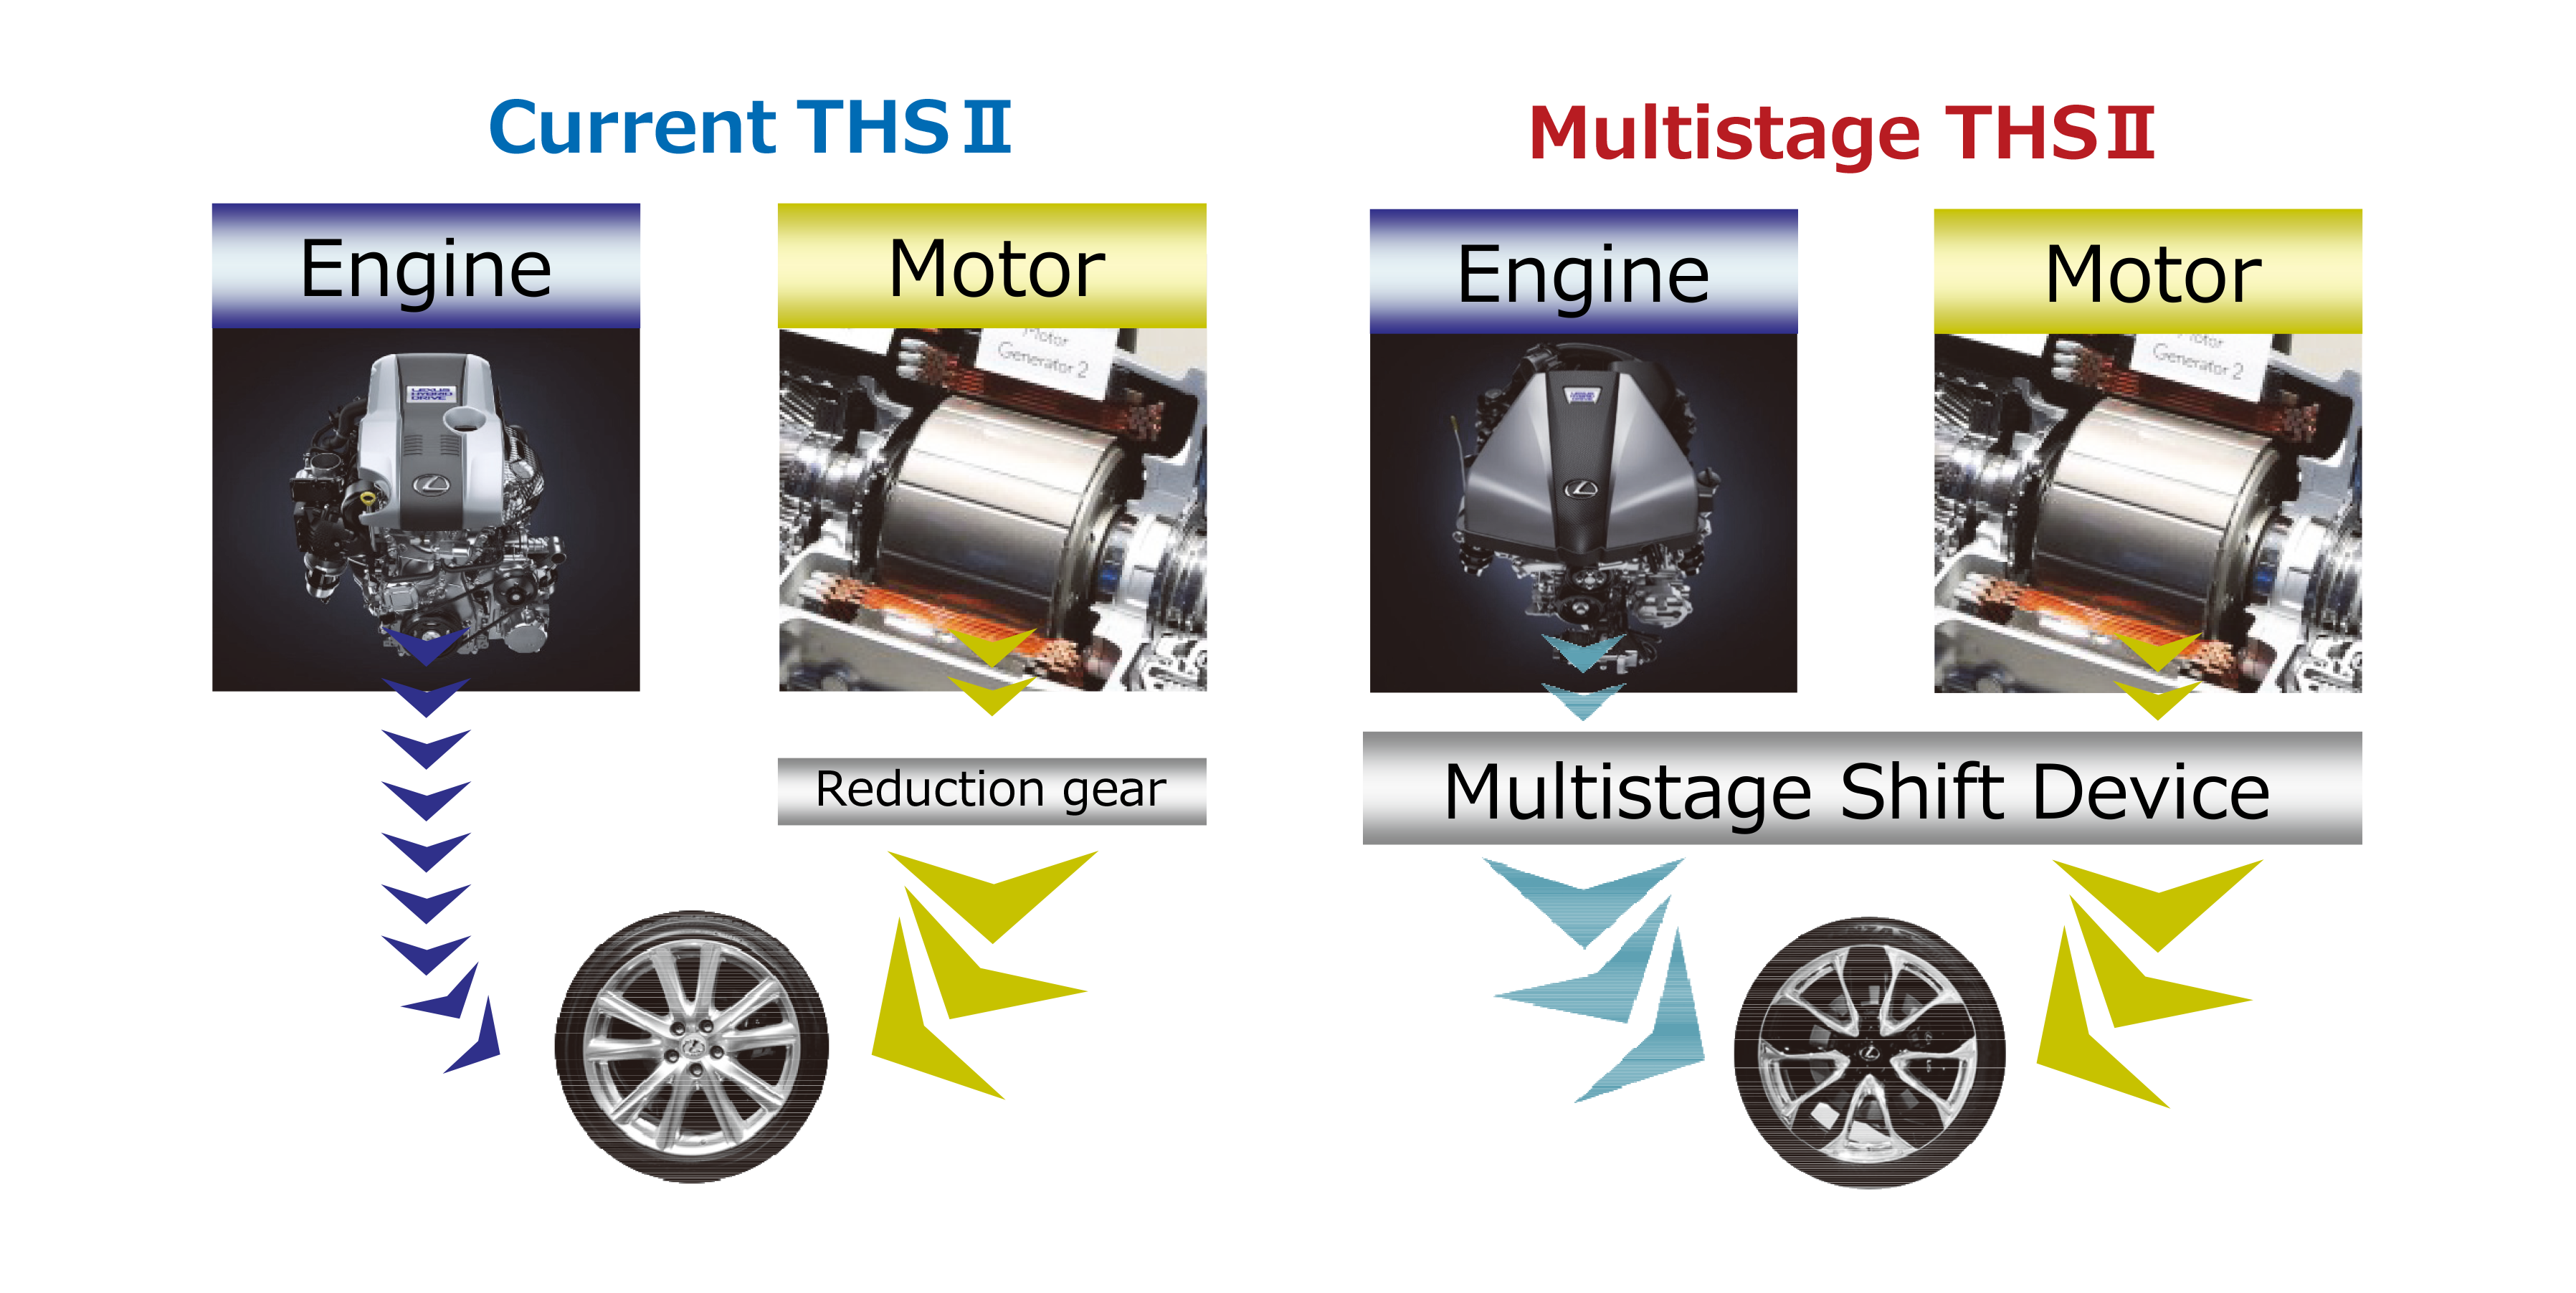 With the Multi-Stage Shift Device, both engine torque and MG torque are reinforced.